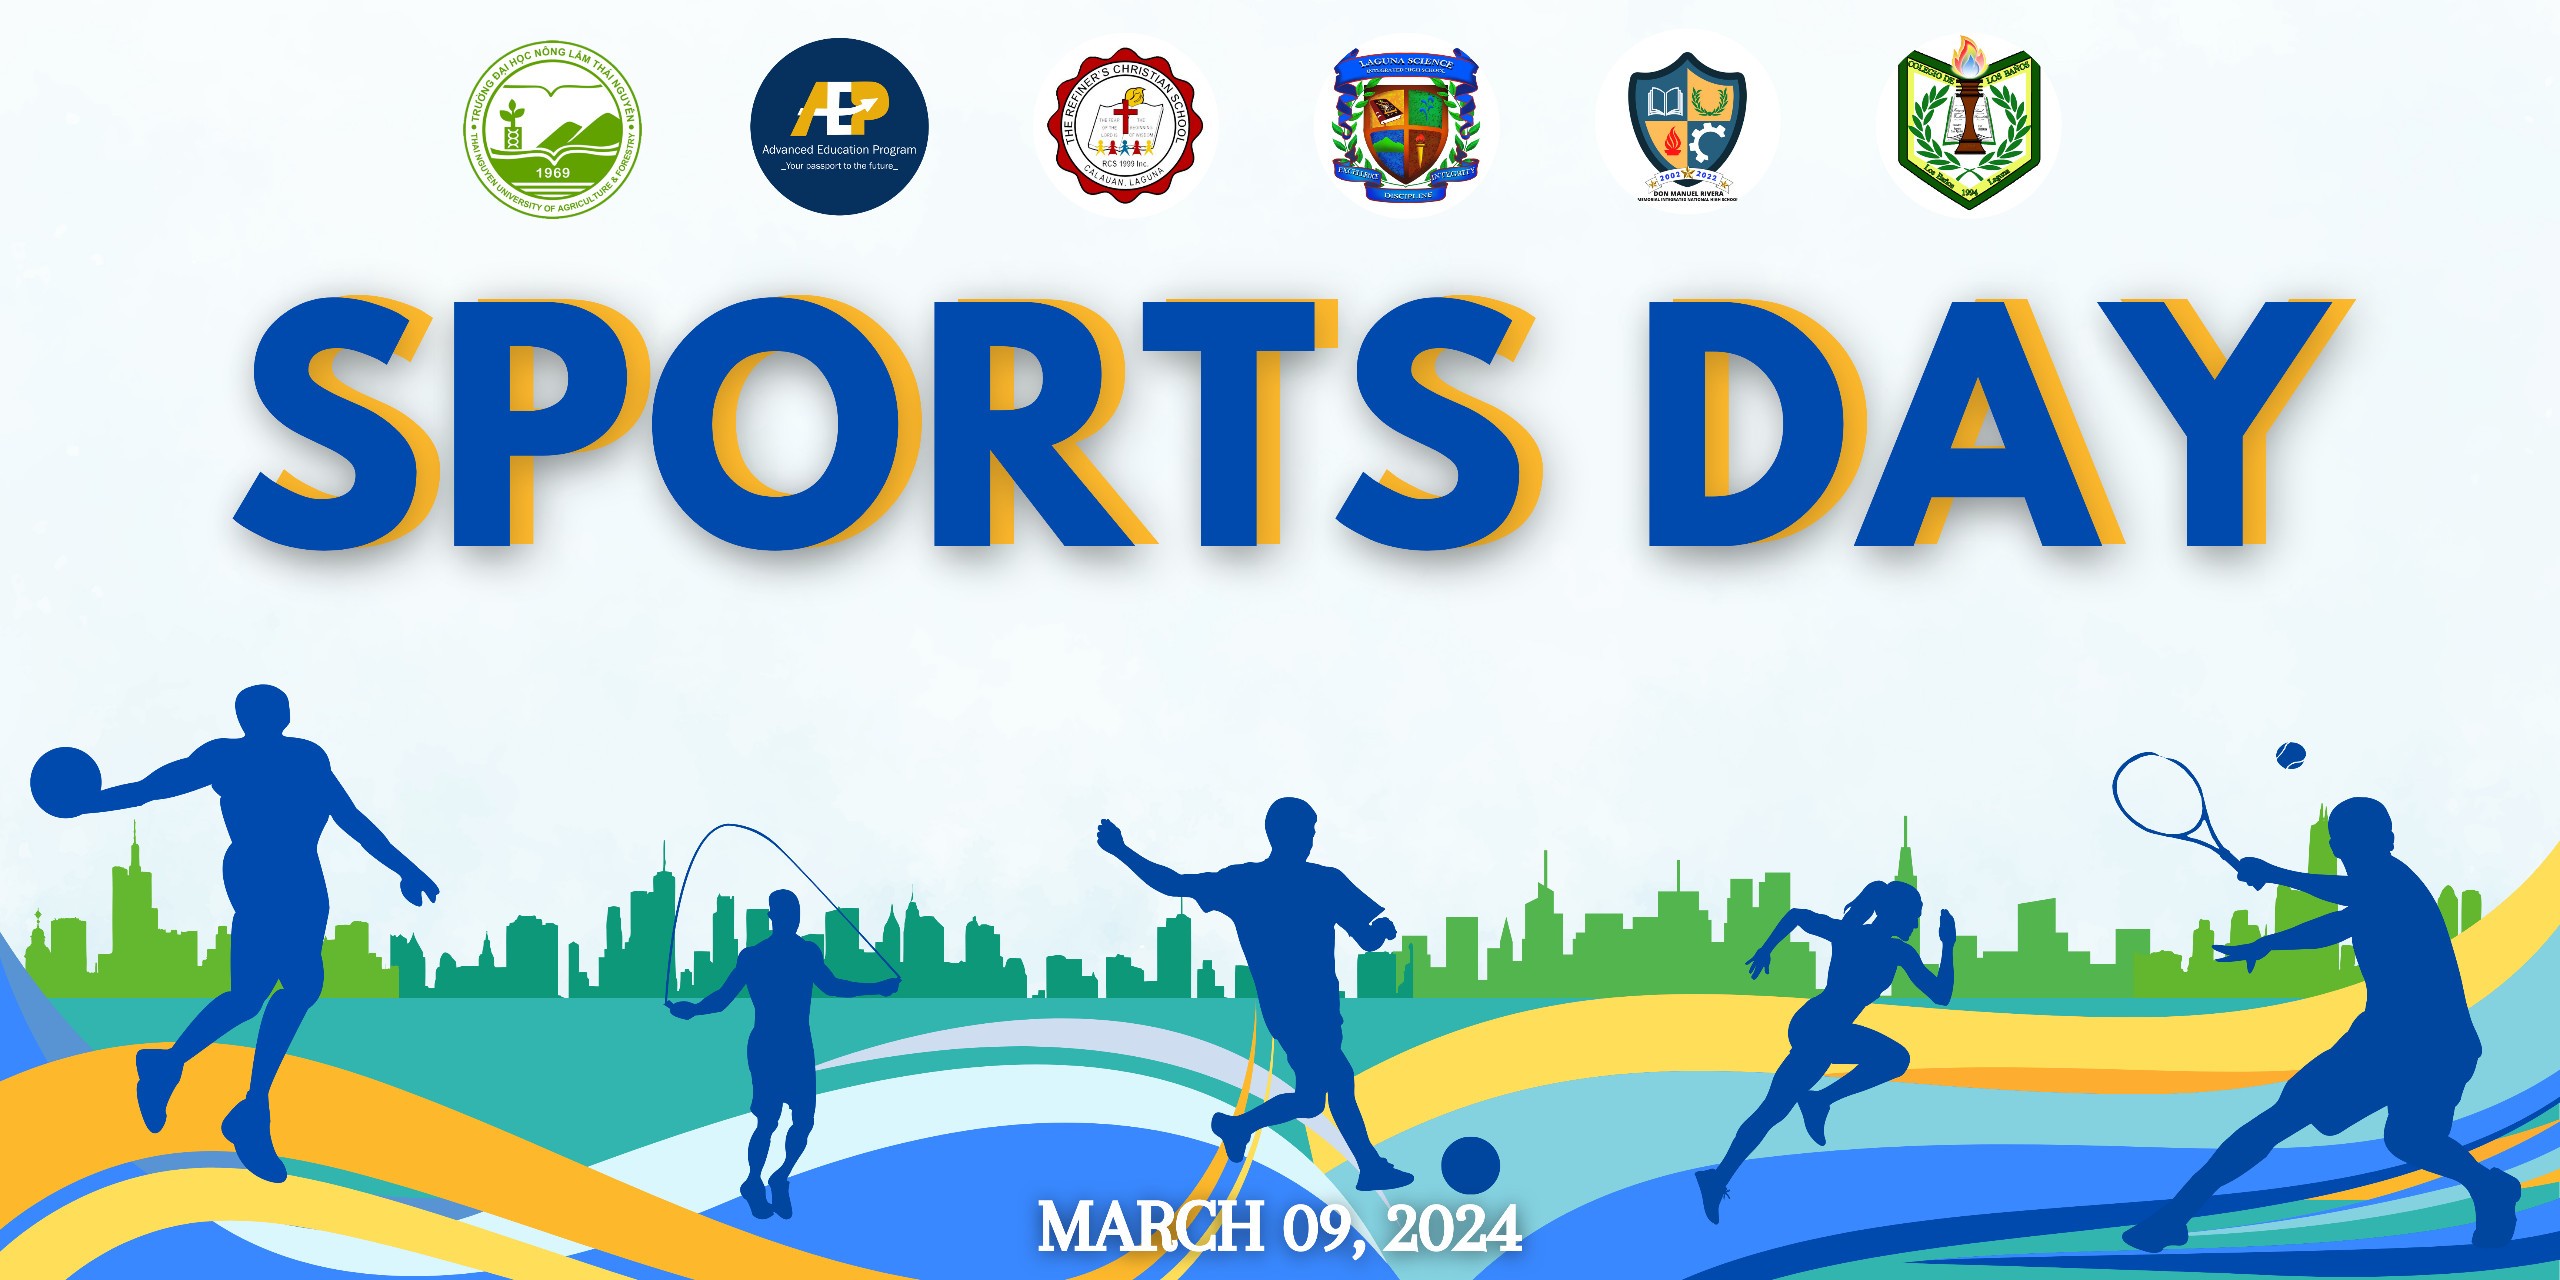 CONGRATULATIONS ON THE SUCCESS OF SPORTS DAY